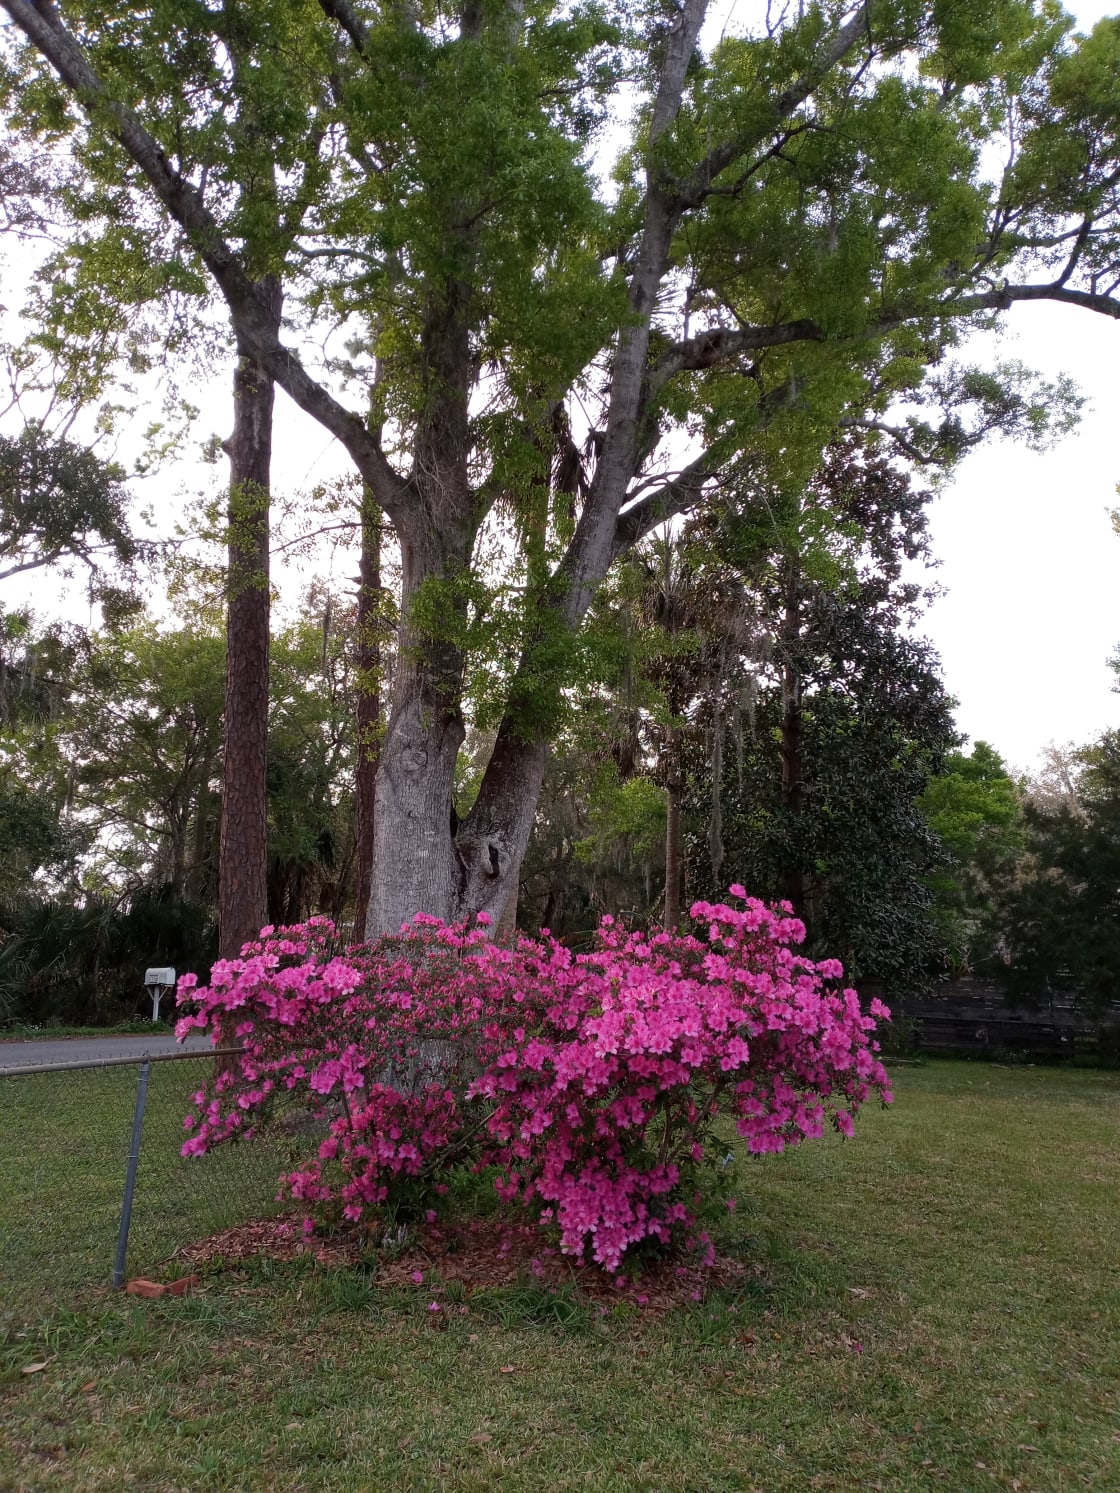 Azaleas bloom throughout the property during the spring.